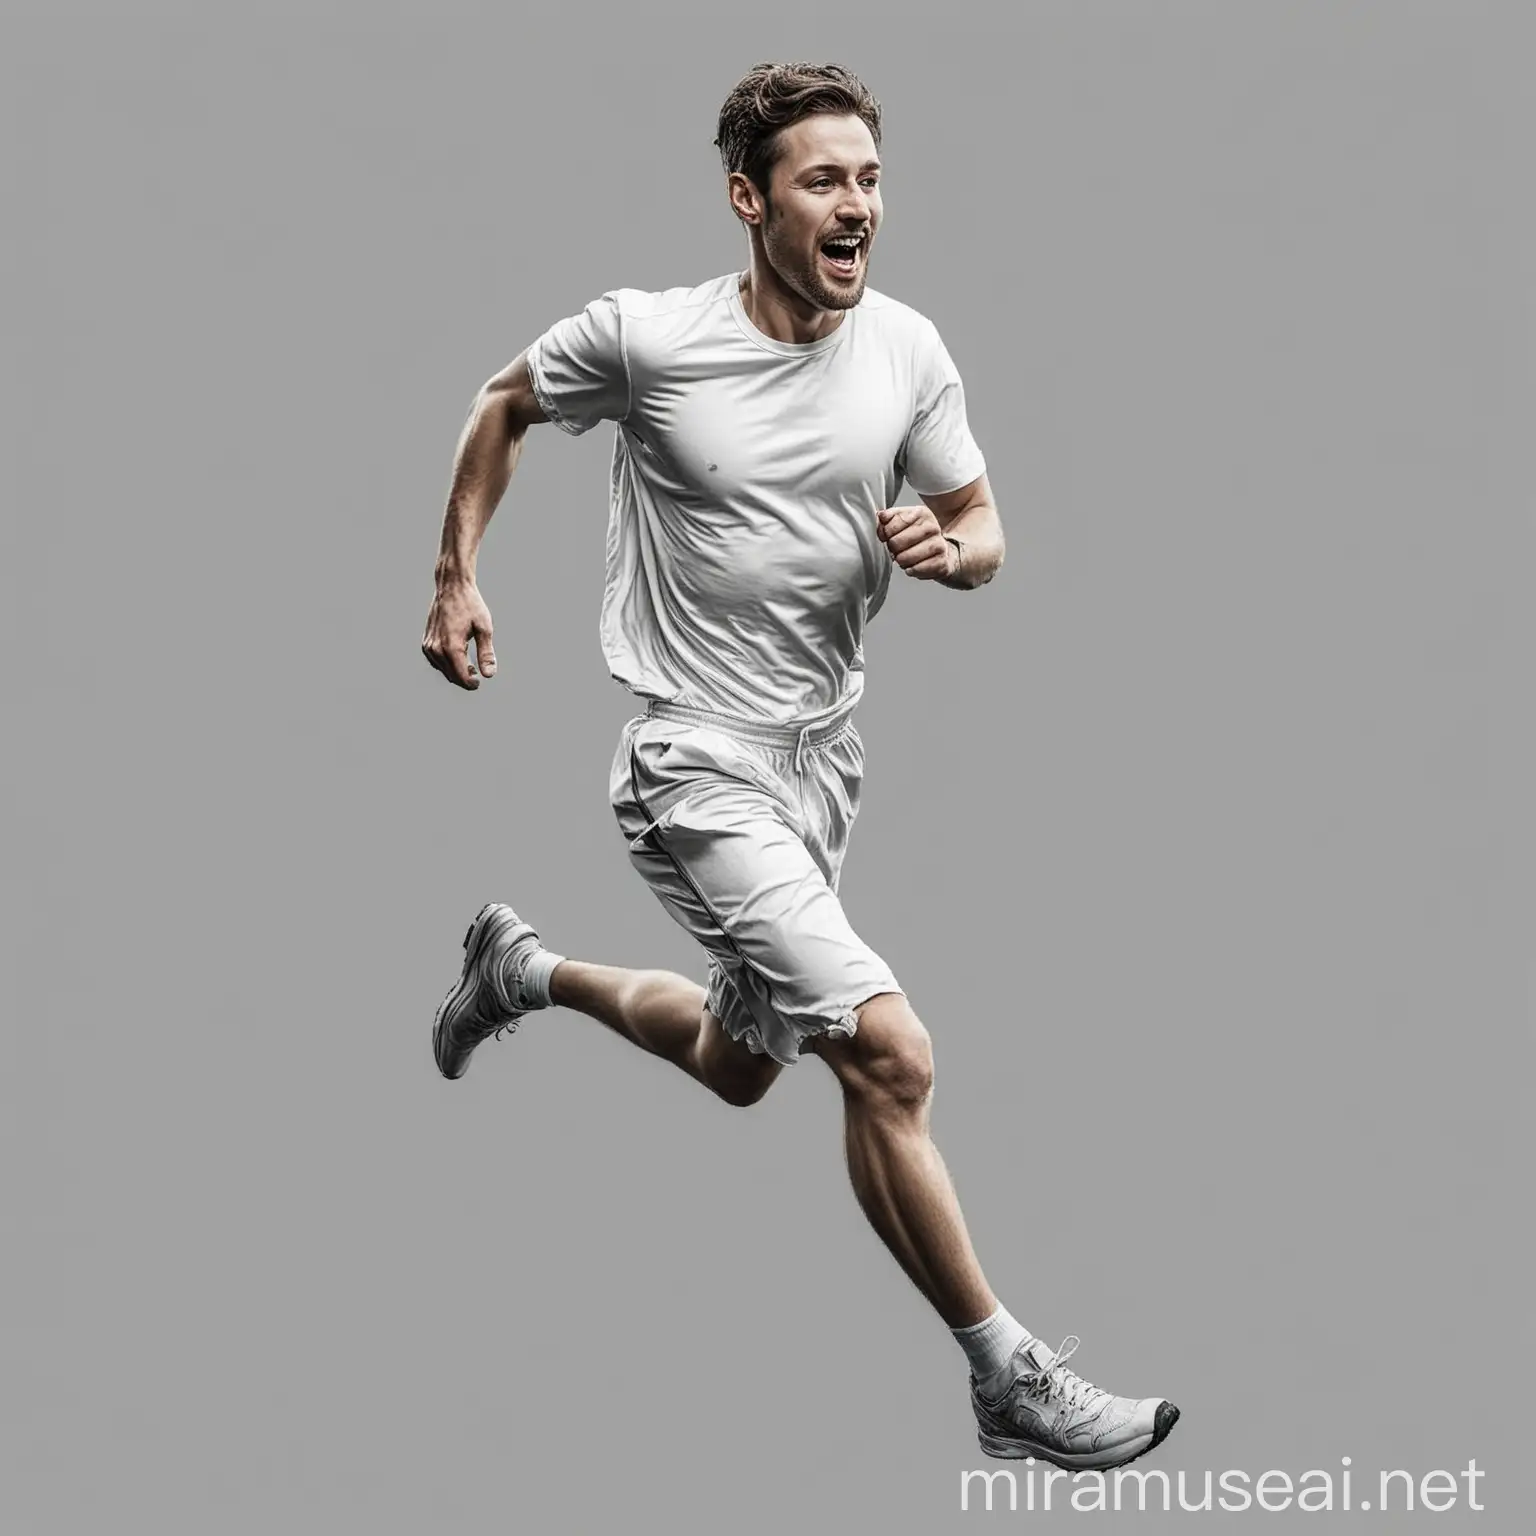 using the style in the uploaded image, I want you to create an image of someone running. Make the colour white with a transparent background